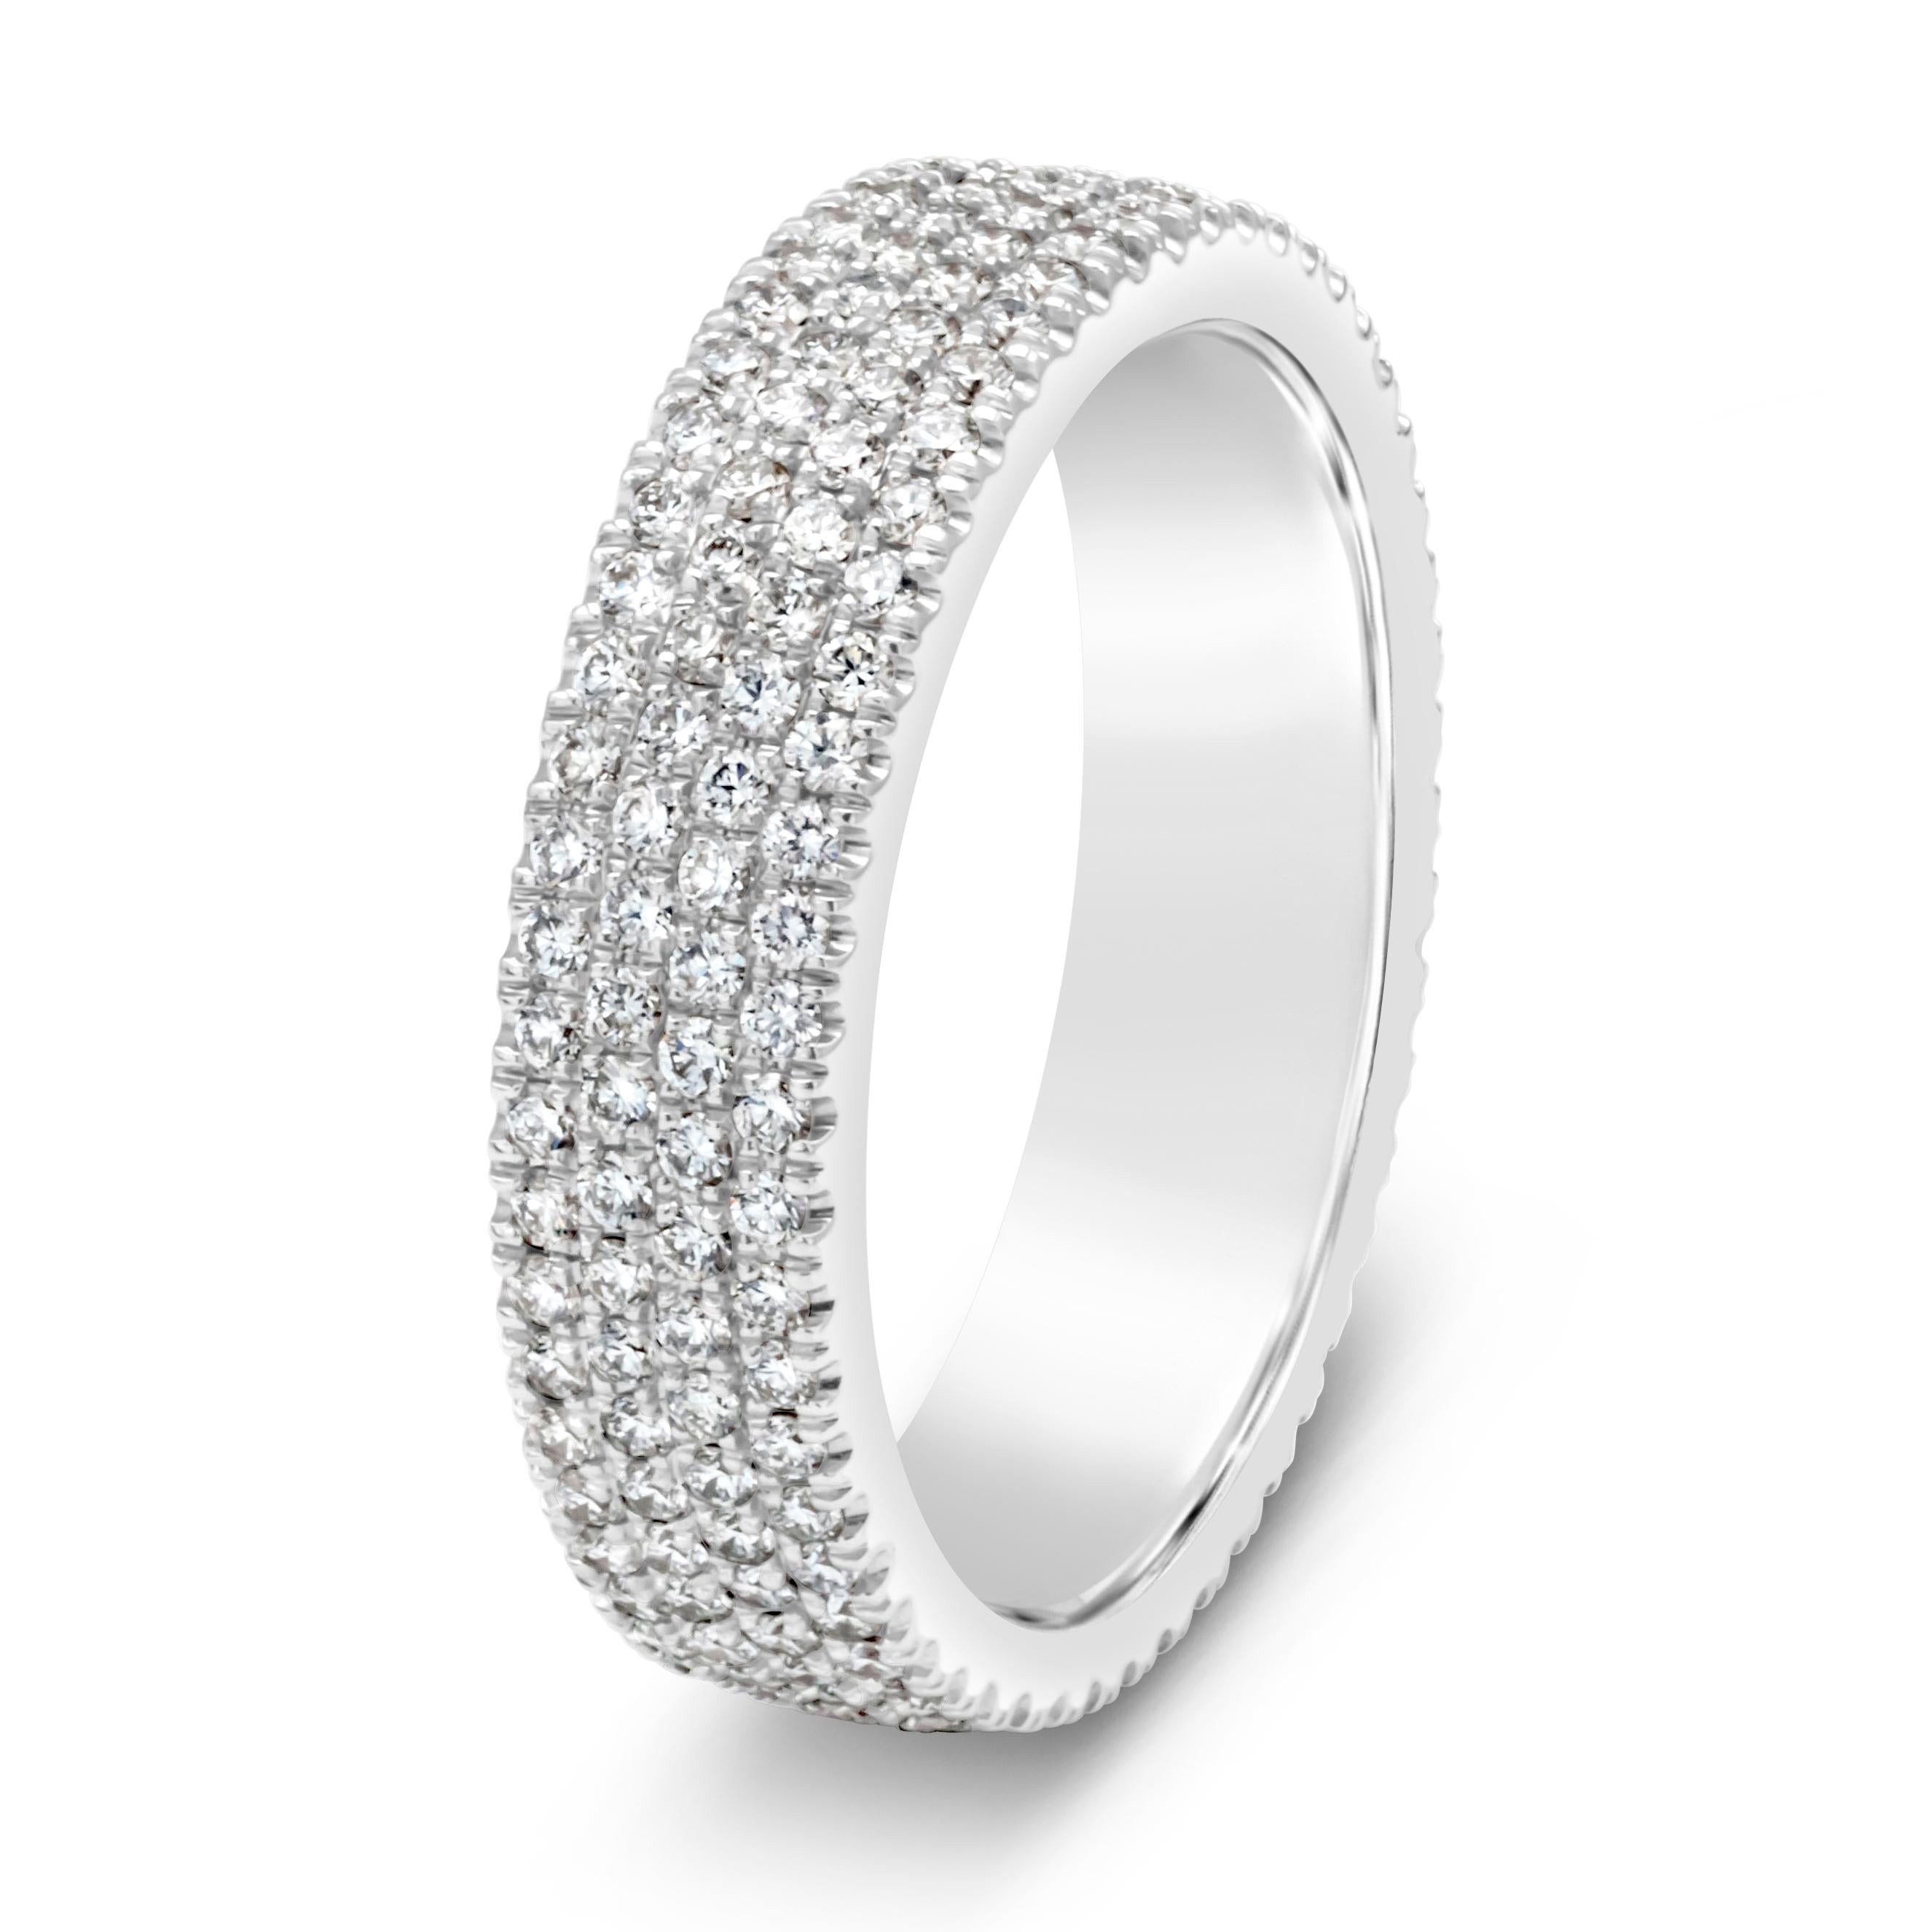 A fashionable and elegant eternity wedding band showcasing four rows of 216 brilliant round diamonds, weighing 1.17 carats total, F color and VS in clarity. Set in a micro-pave setting and Made in 18K White Gold.

Style available in different price